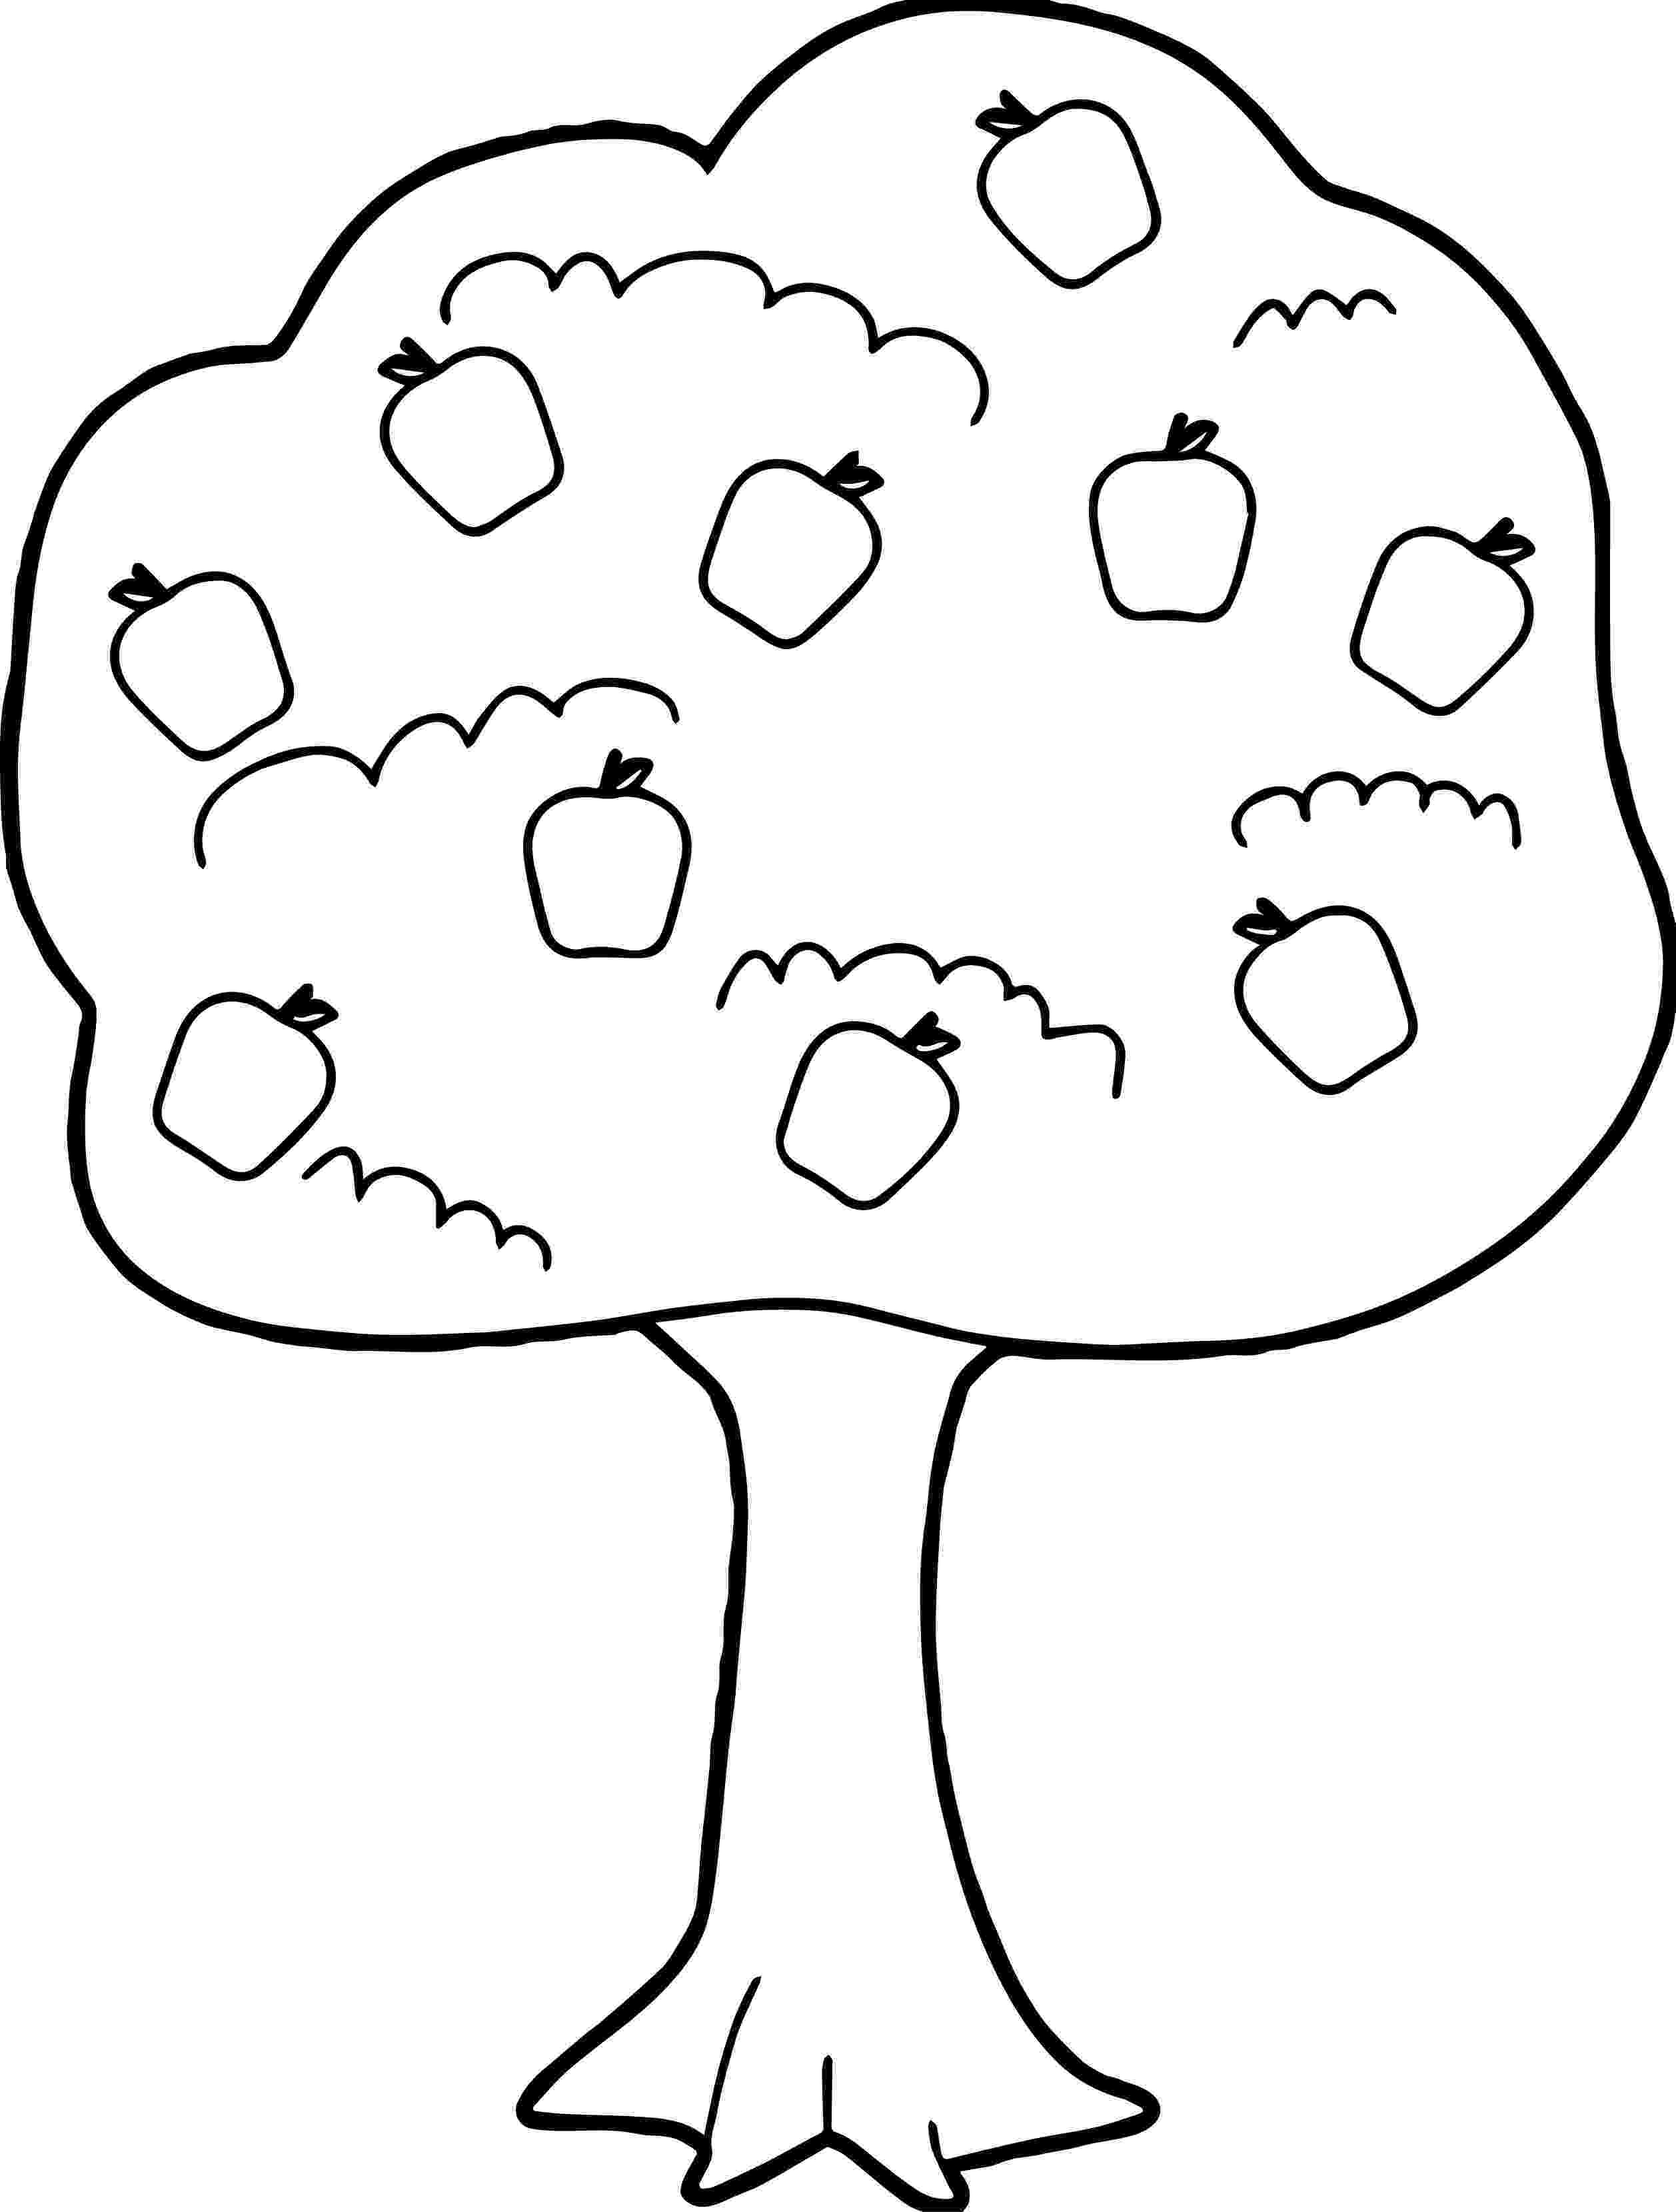 coloring pages of fruit trees fruit tree coloring page at getcoloringscom free of fruit trees coloring pages 